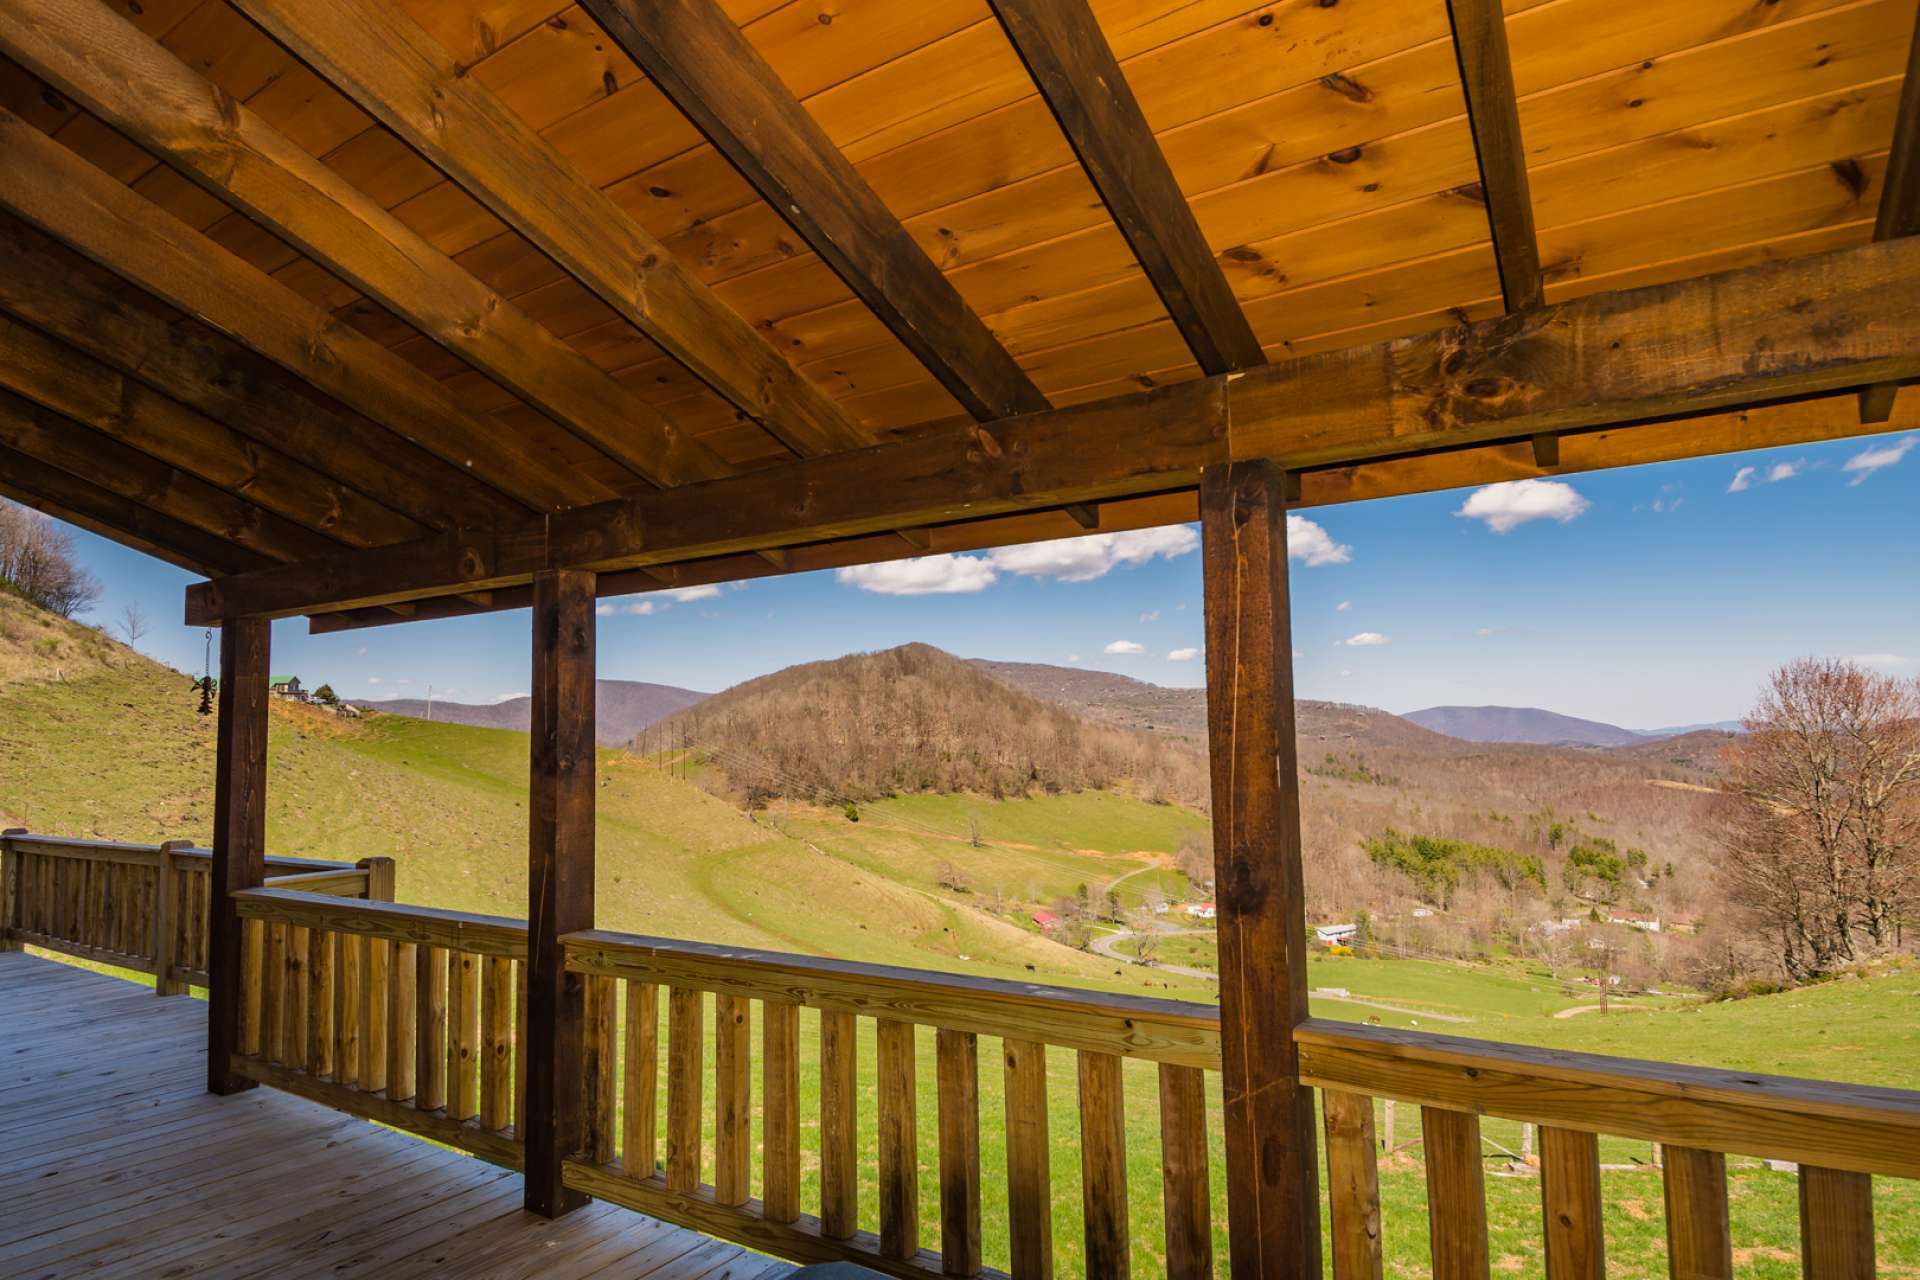 Enjoy the great outdoors with views of pasture land and surrounding mountains from the partially covered deck.  The distant mountain views include views of Grandfather Mountain.